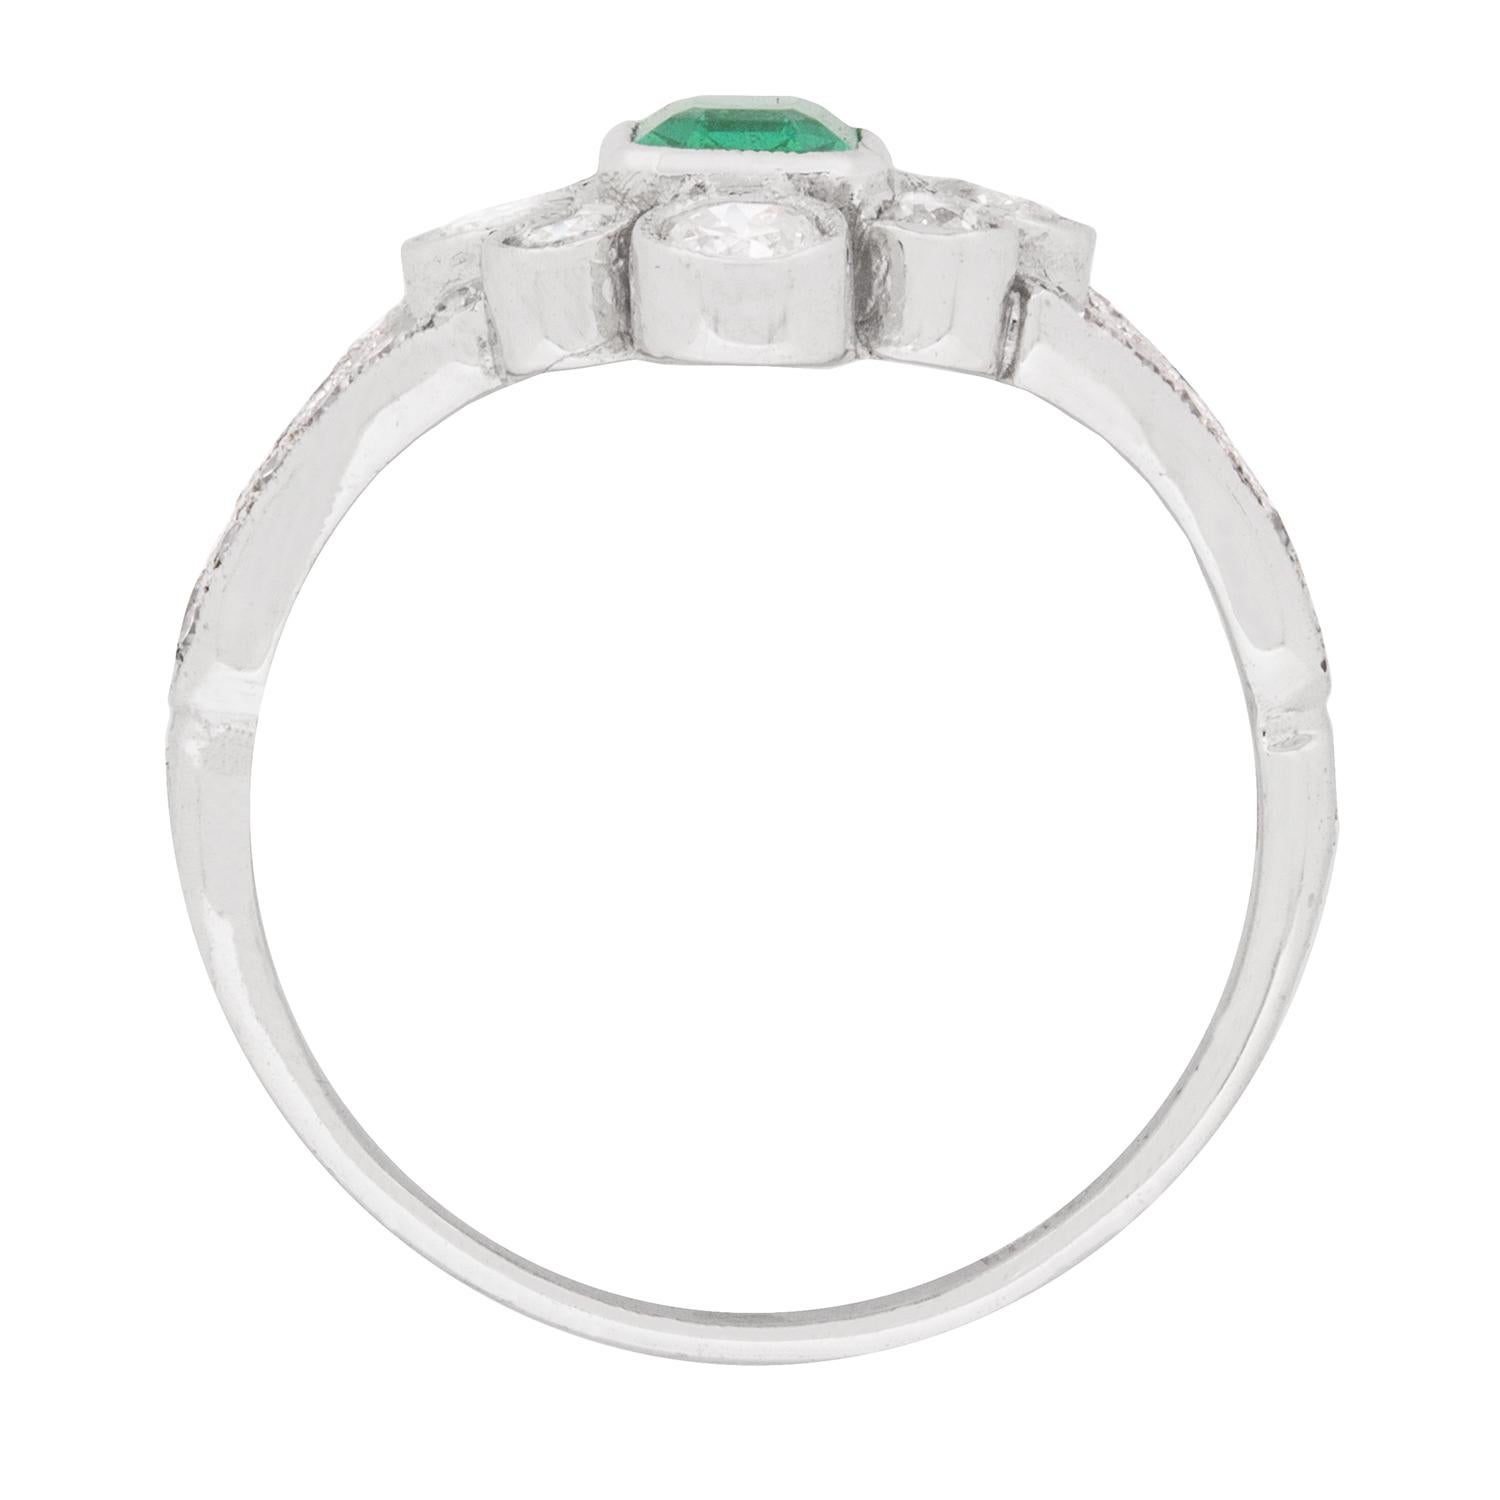 This art deco ring dates back to approximately the 1940s and features a sea green emerald in the centre, weighing 0.70 carat. It is set within an 18 carat white gold rub over setting. In the halo which surrounds the emerald, there are four diamonds